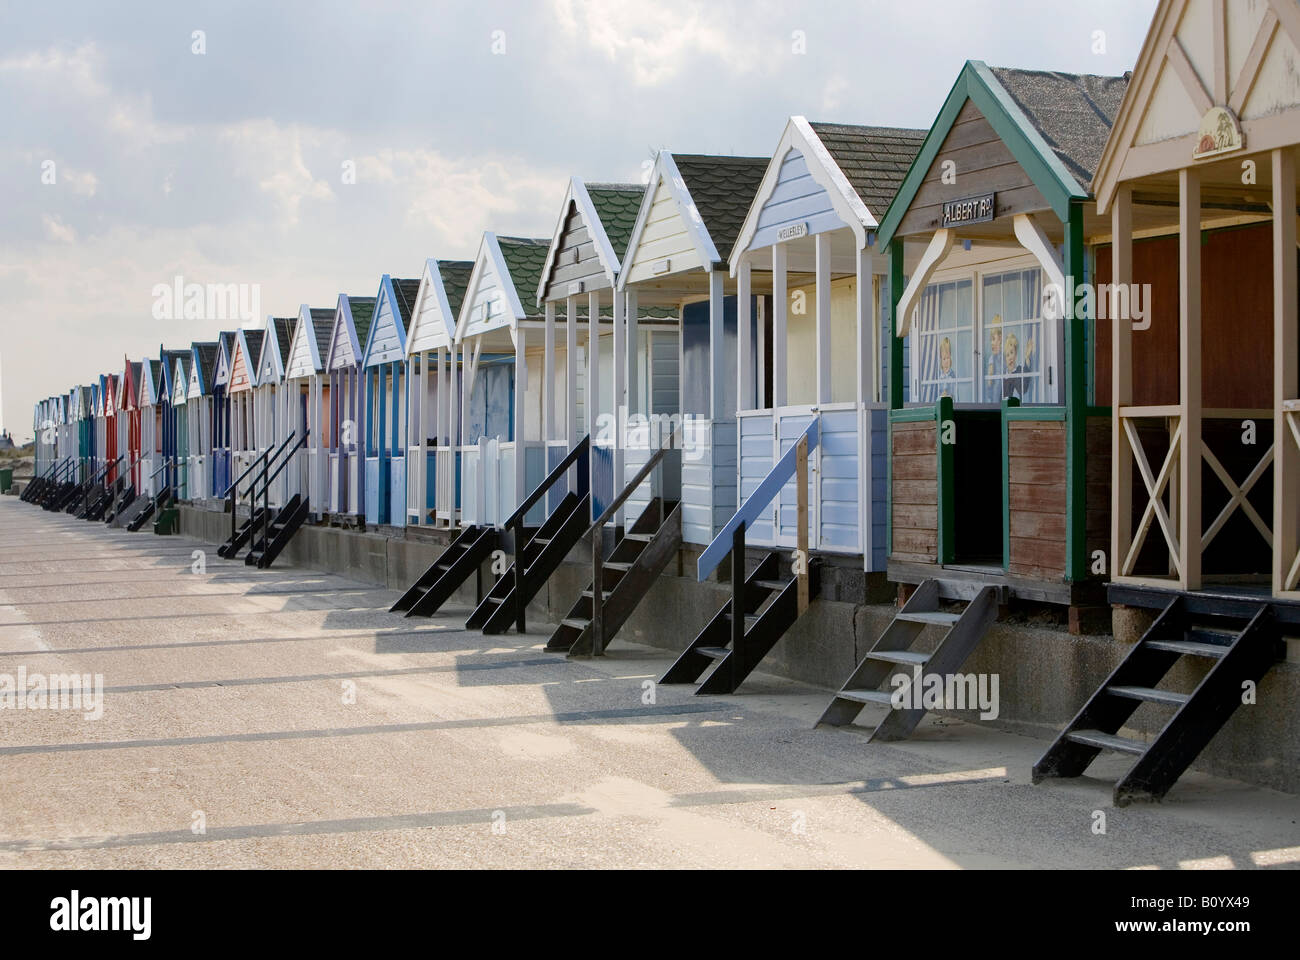 Beach huts at Southwold in Suffolk, England Stock Photo